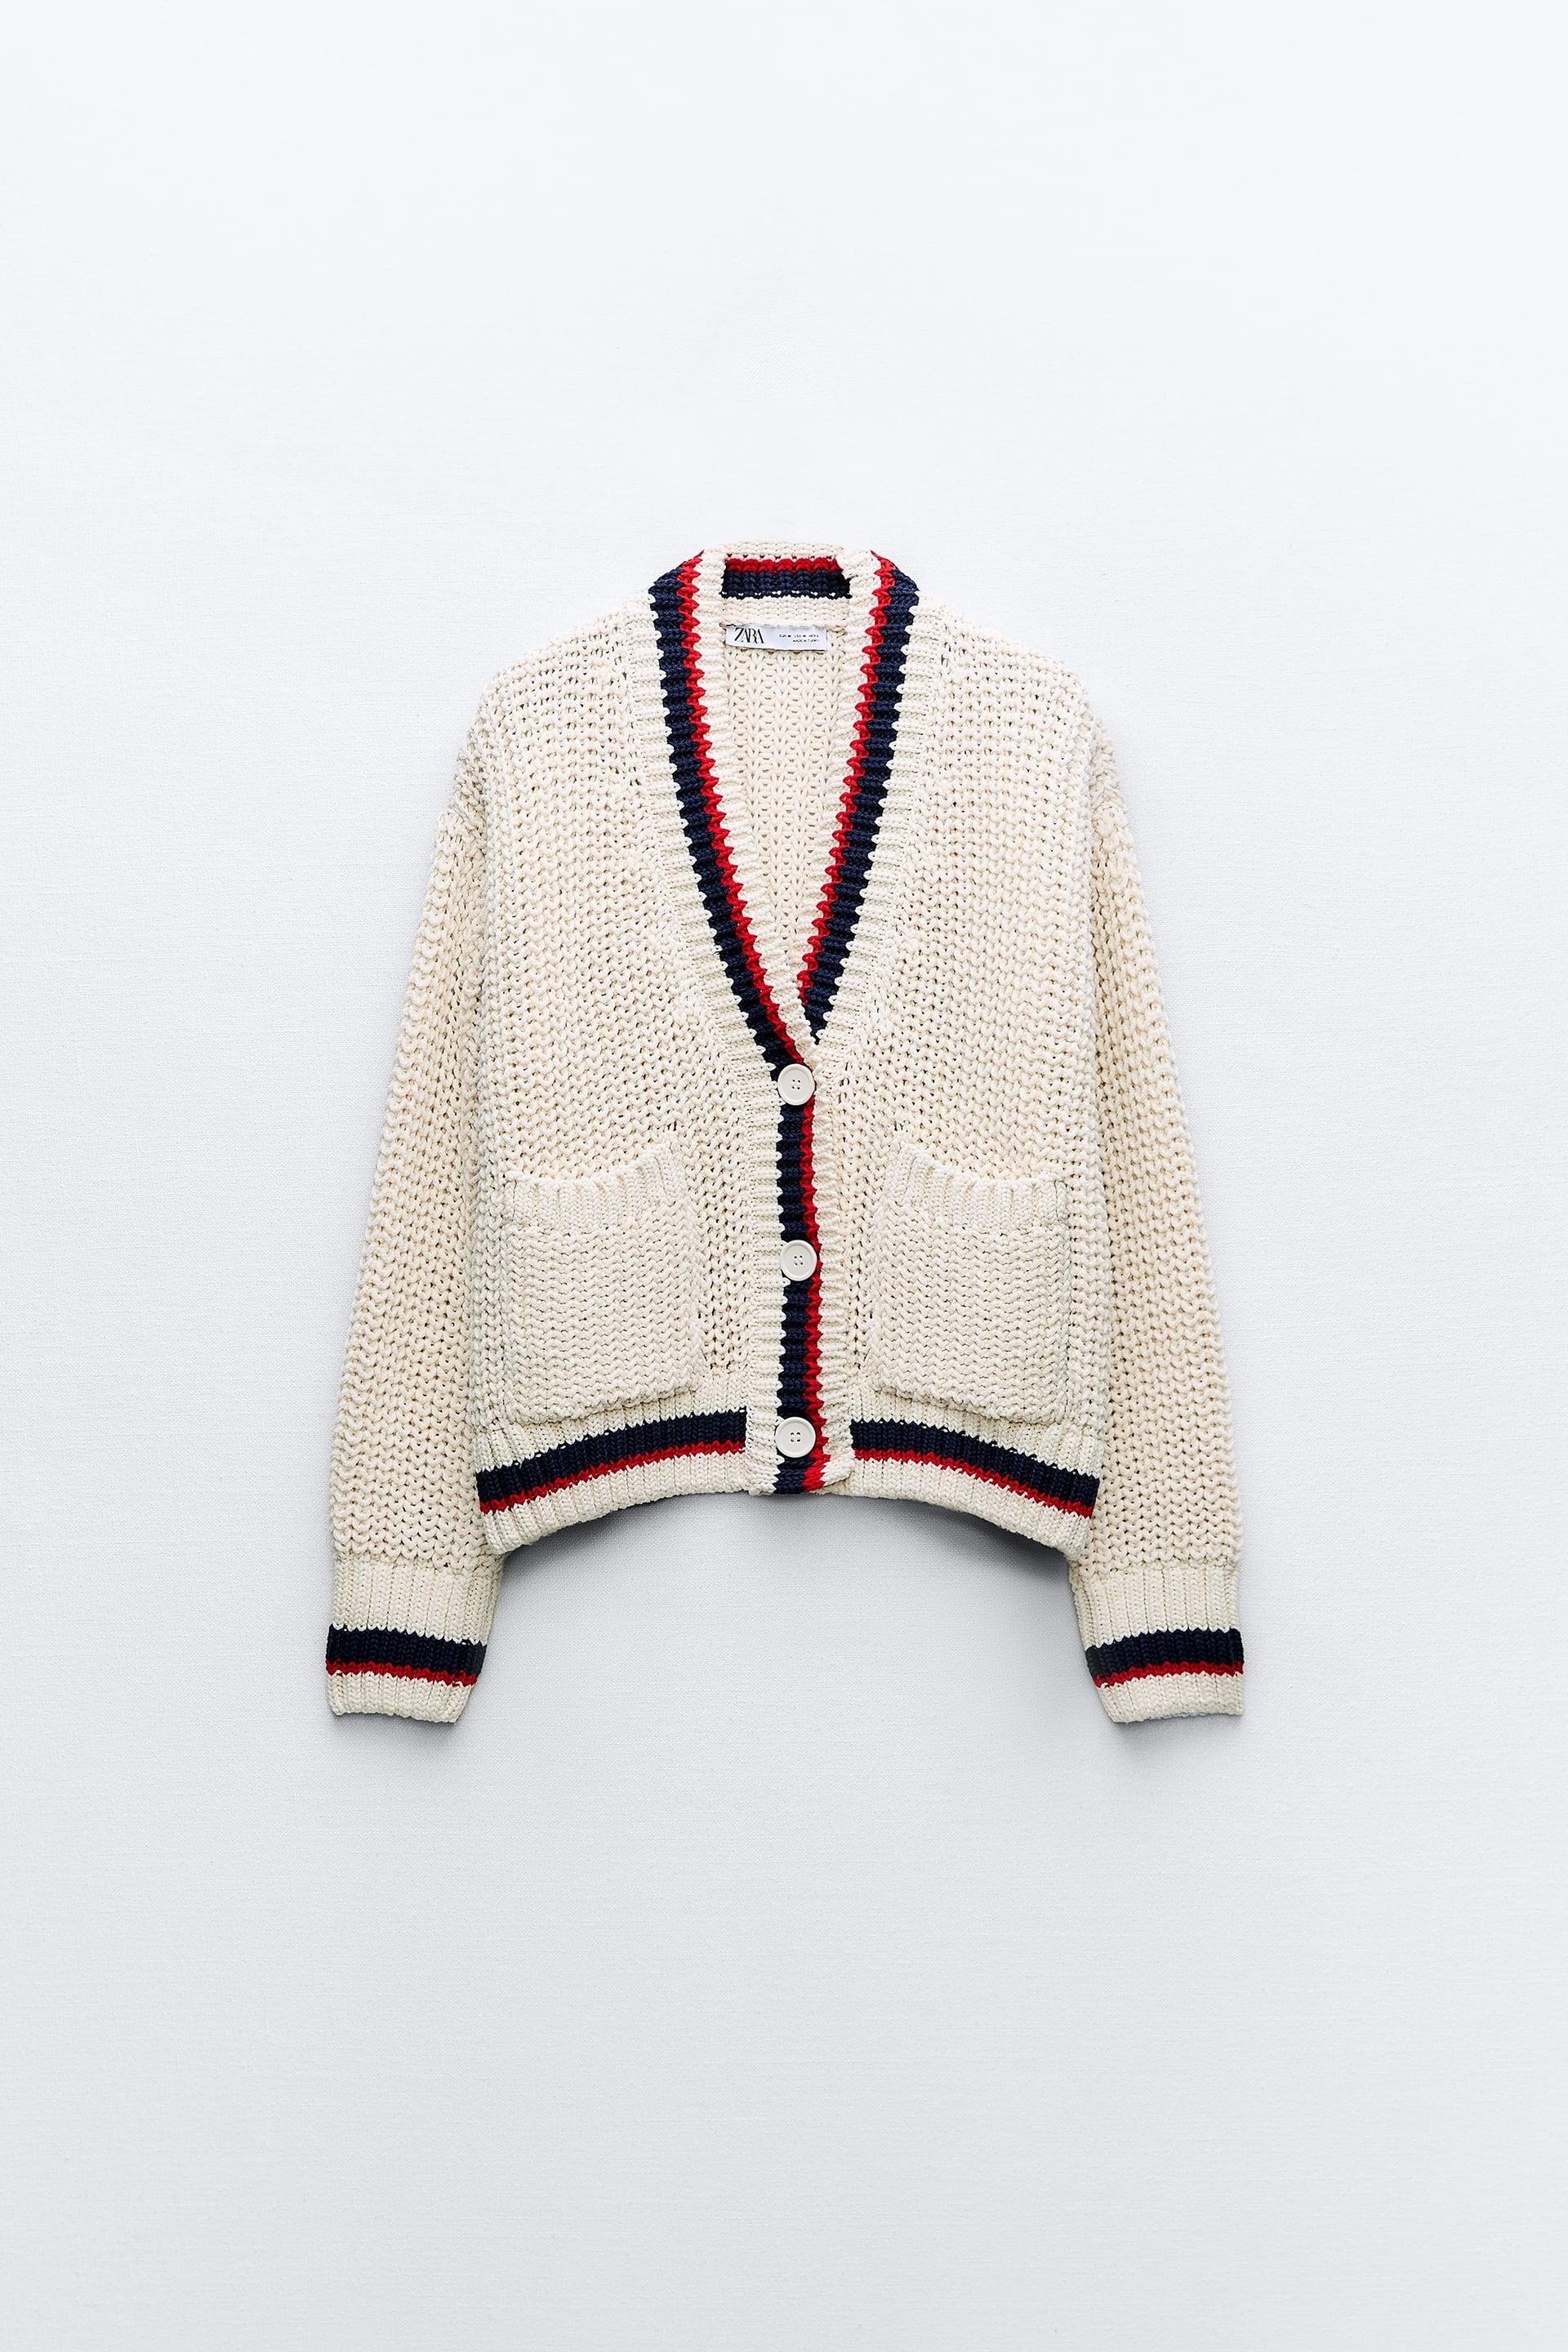 KNIT JACKET WITH PIPING by ZARA